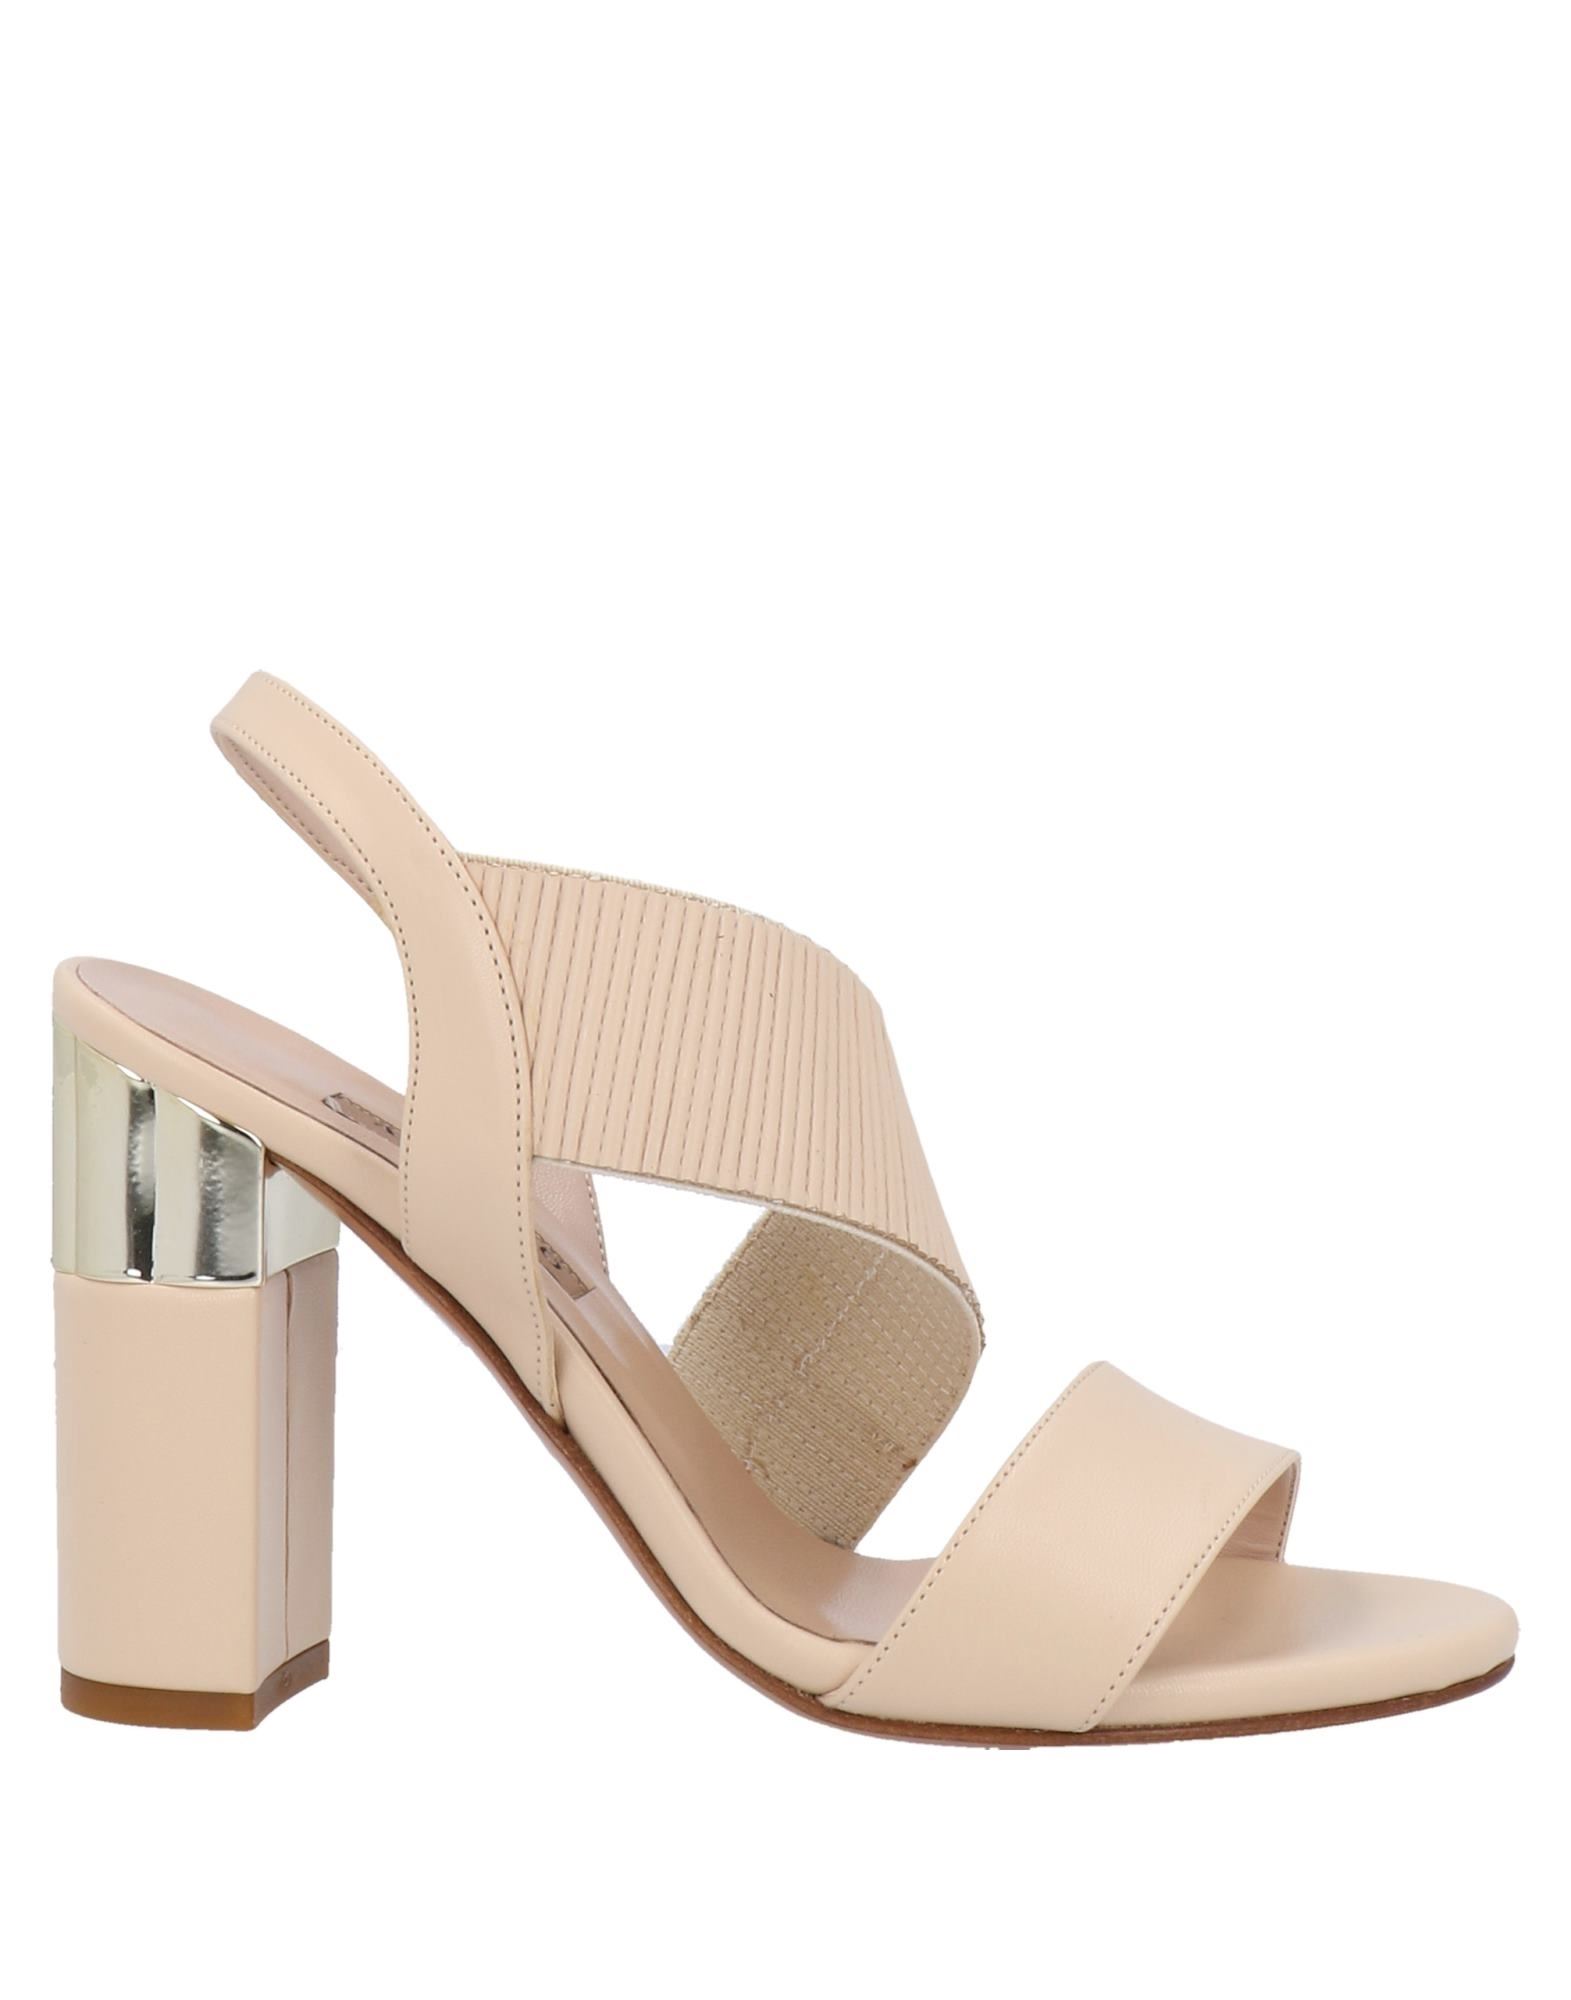 Albano Sandals In Pale Pink